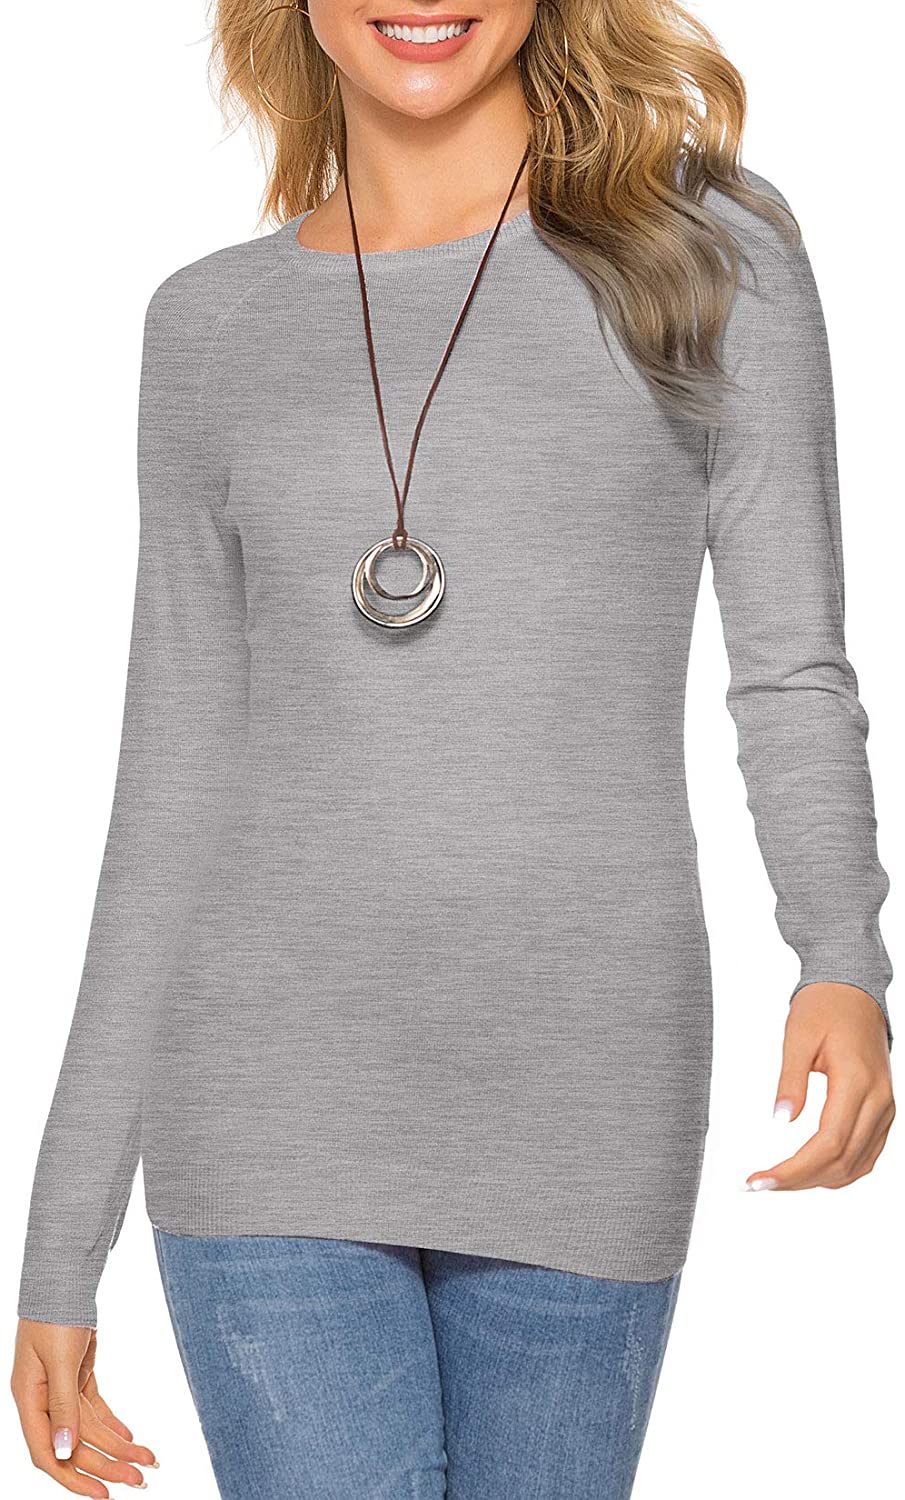 HOCOSIT Women's Long Sleeve Round Neck Tunic Solid Color Raglan Base Lightweight Pullover Sweater